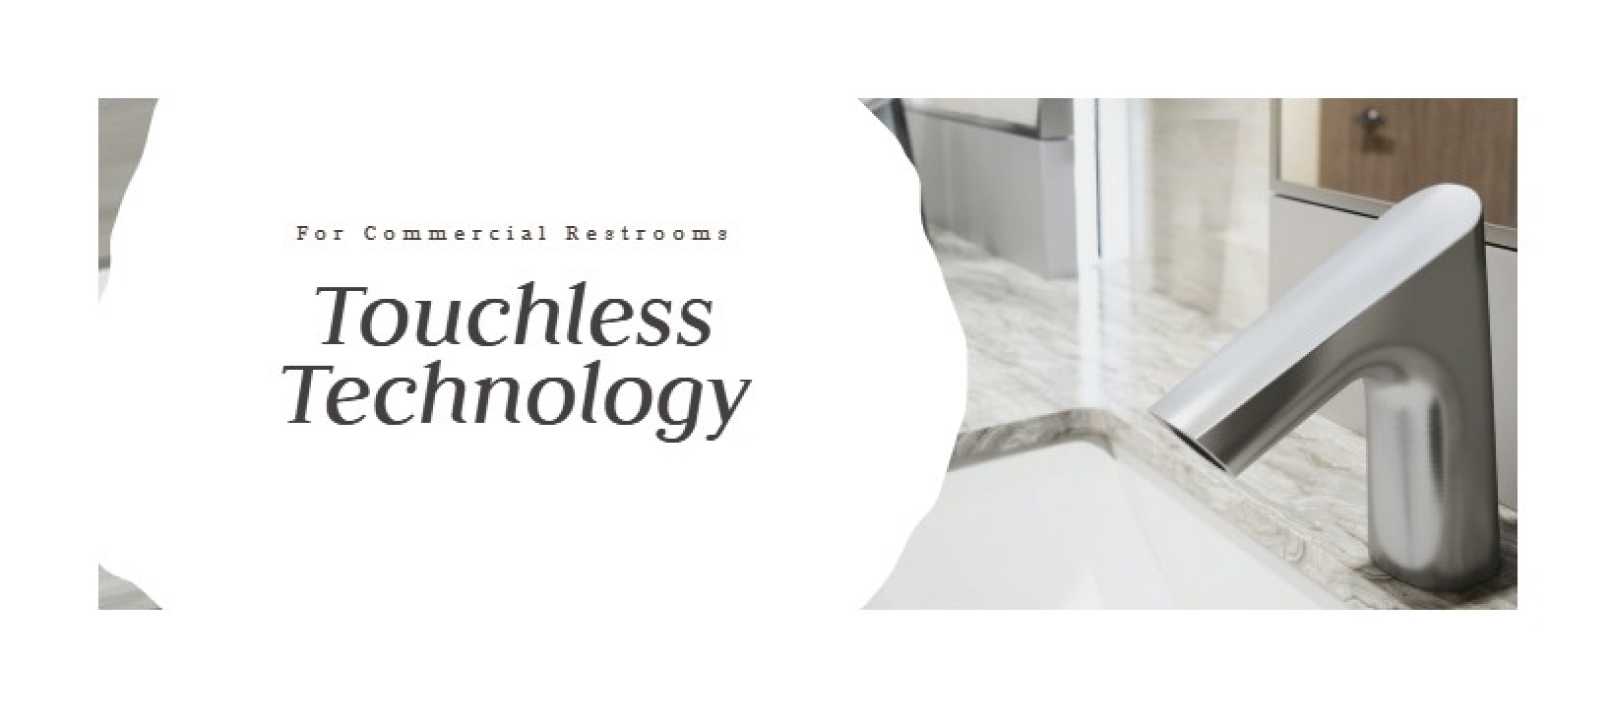 Touchless Technology